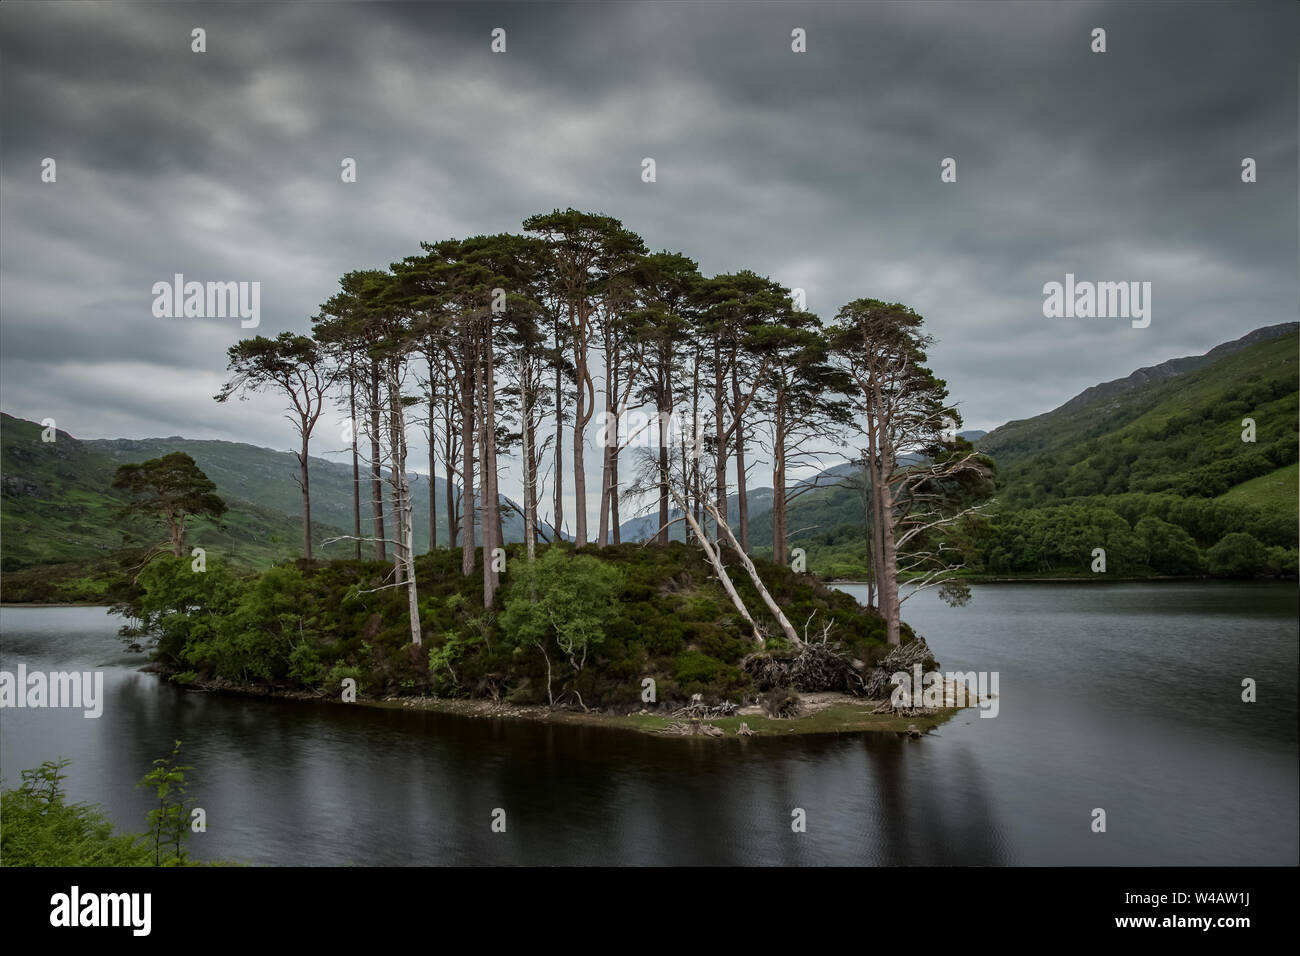 Eilean na Moine, Loch Eilt, Scotland - filming location for Dumbledore's burial in Harry Potter Stock Photo